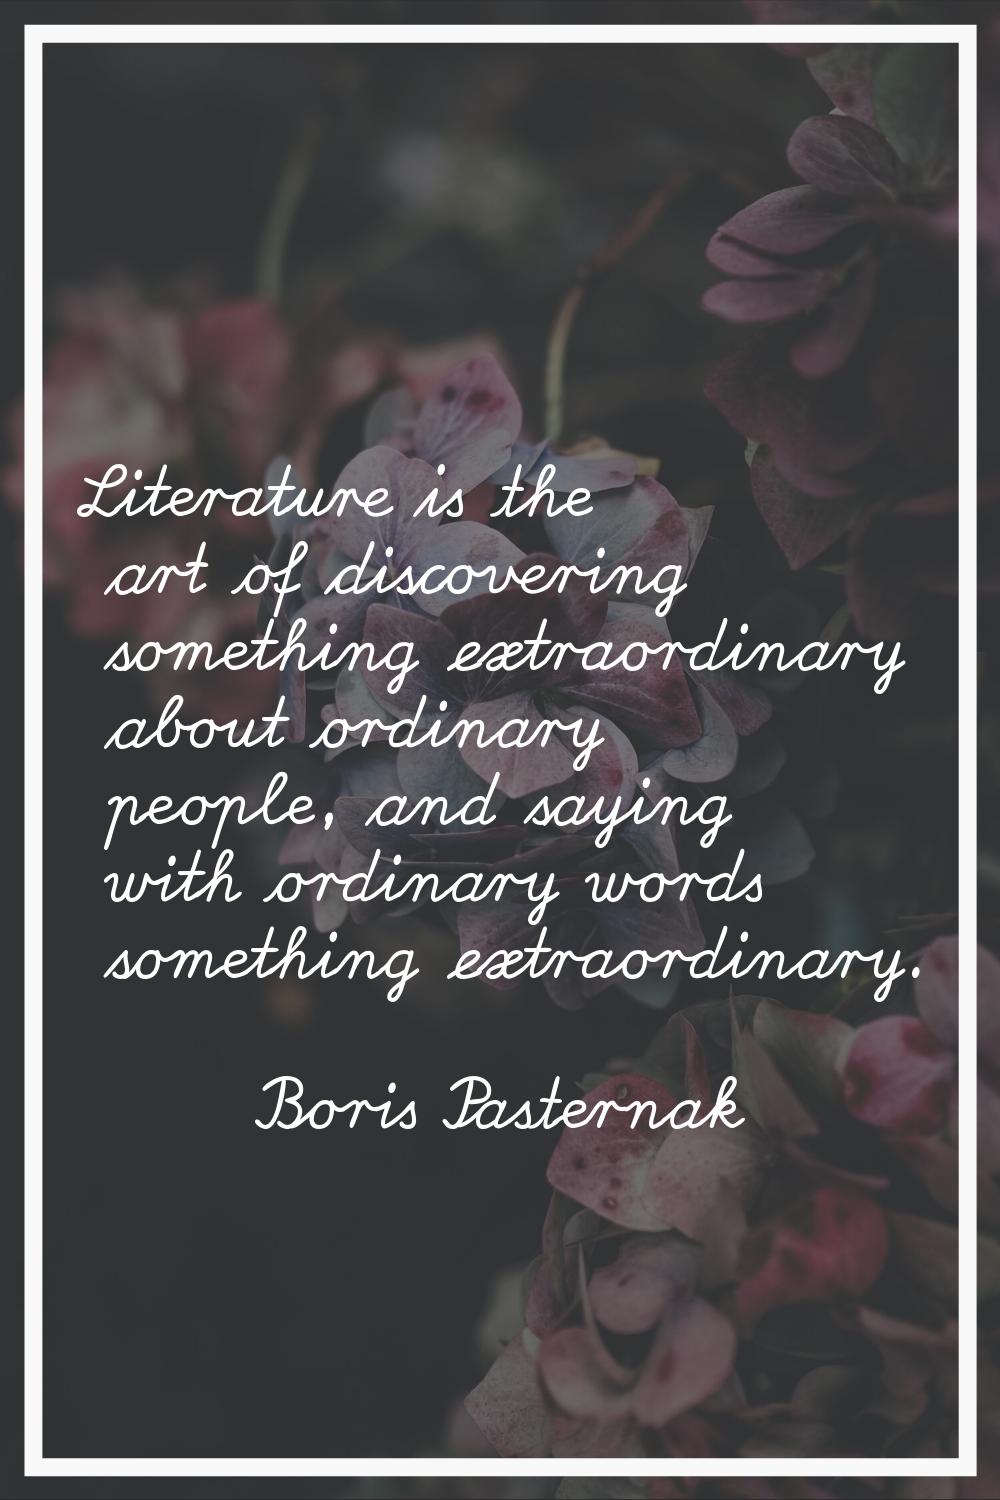 Literature is the art of discovering something extraordinary about ordinary people, and saying with